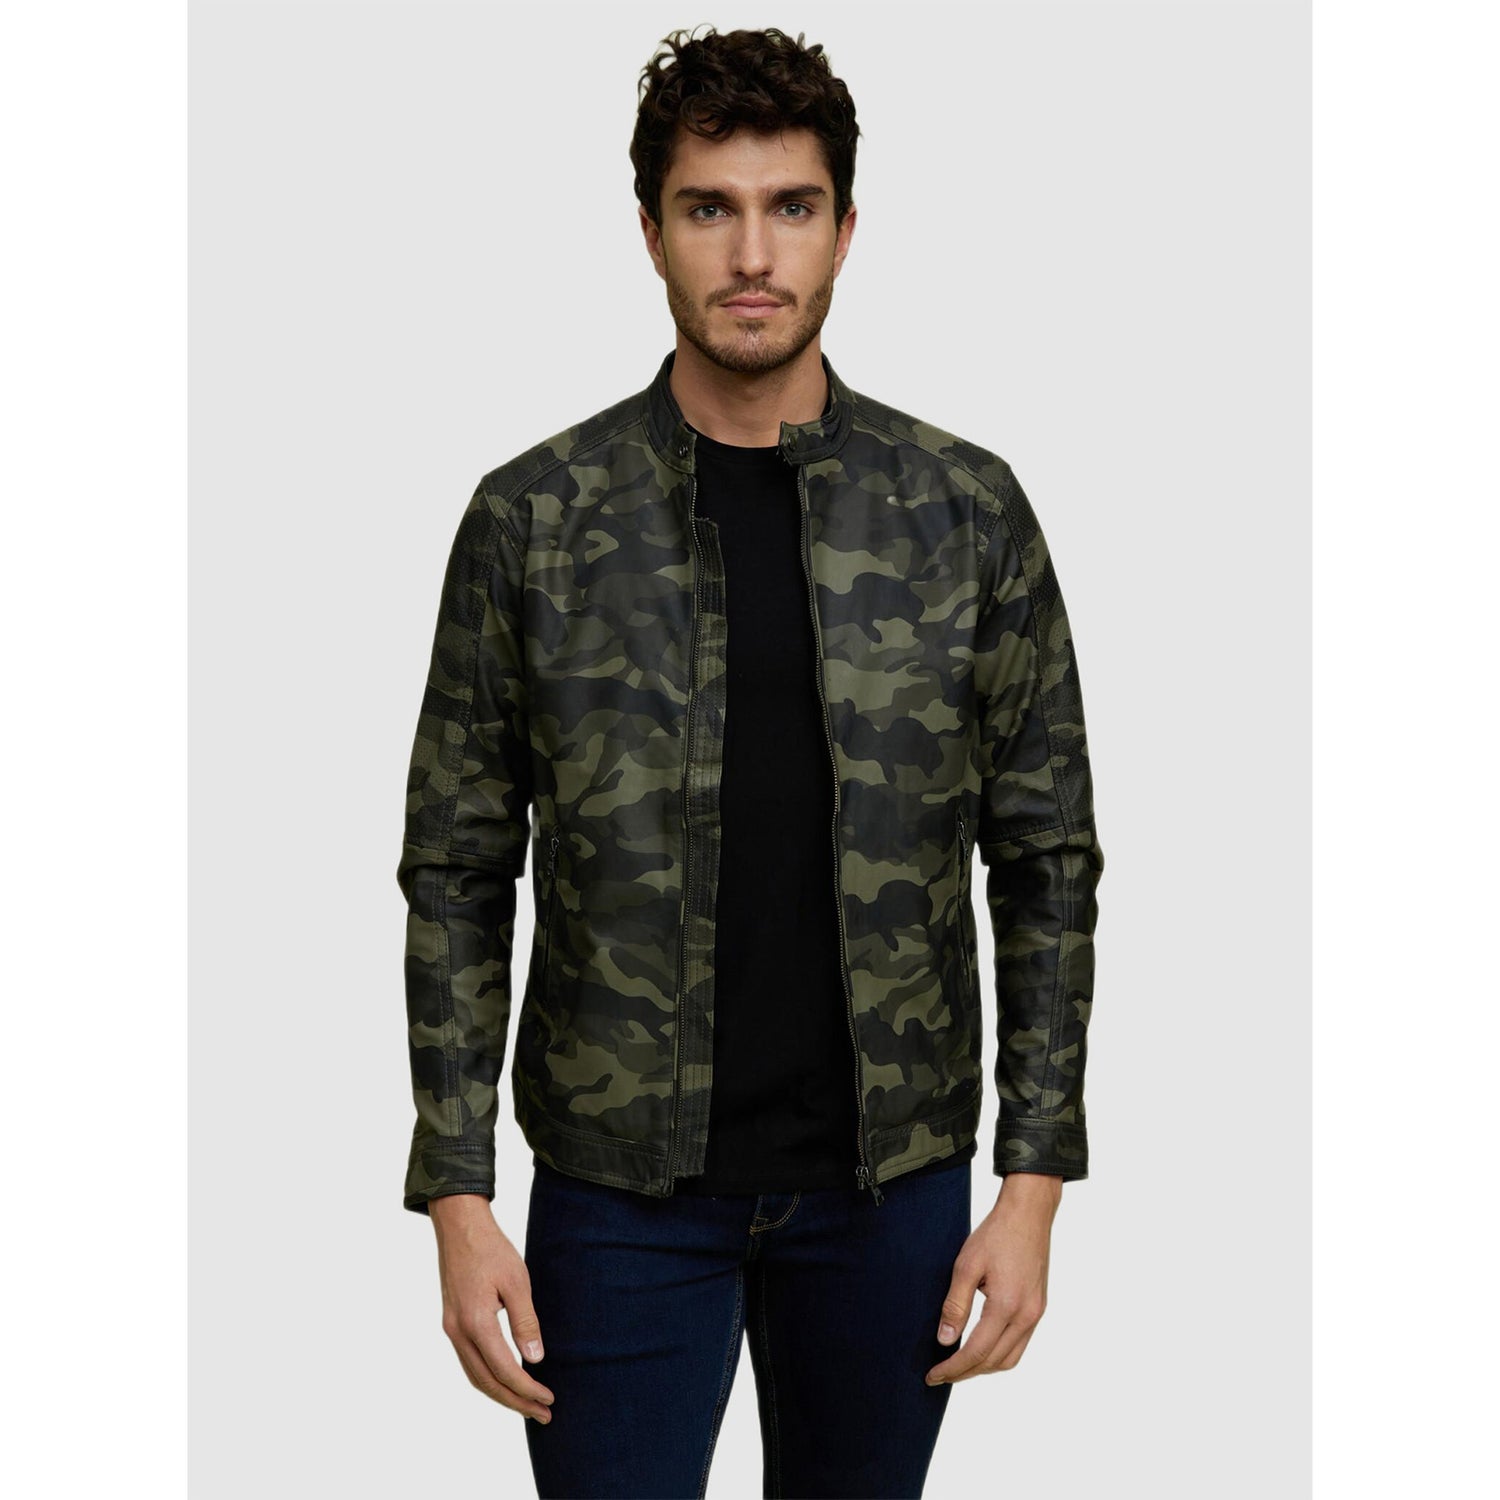 Black and Olive Green Camouflage Long Sleeves Open Front Jacket (VUCAMBI)